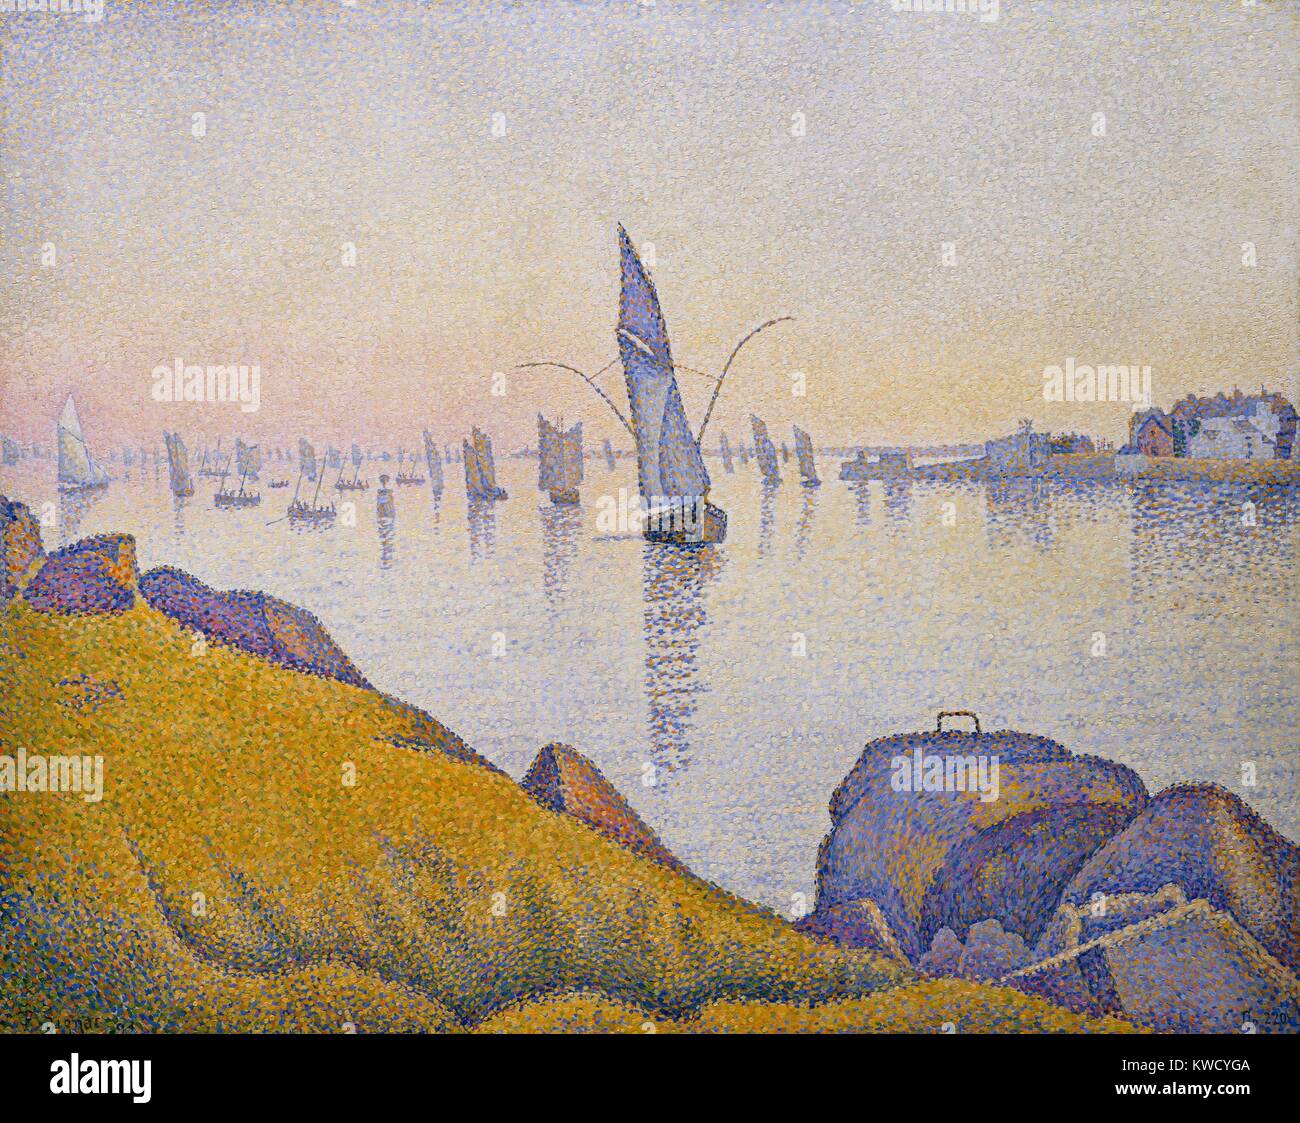 Evening Calm, Concarneau, Opus 220, (Allegro Maestoso), by Paul Signac, 1891, French Post-Impressionist. This oil on canvas painting depicts fishing boats near the French town of Concarneau, in Brittany. Signac gave his Concarneau paintings musical sub-ti (BSLOC 2017 5 90) Stock Photo